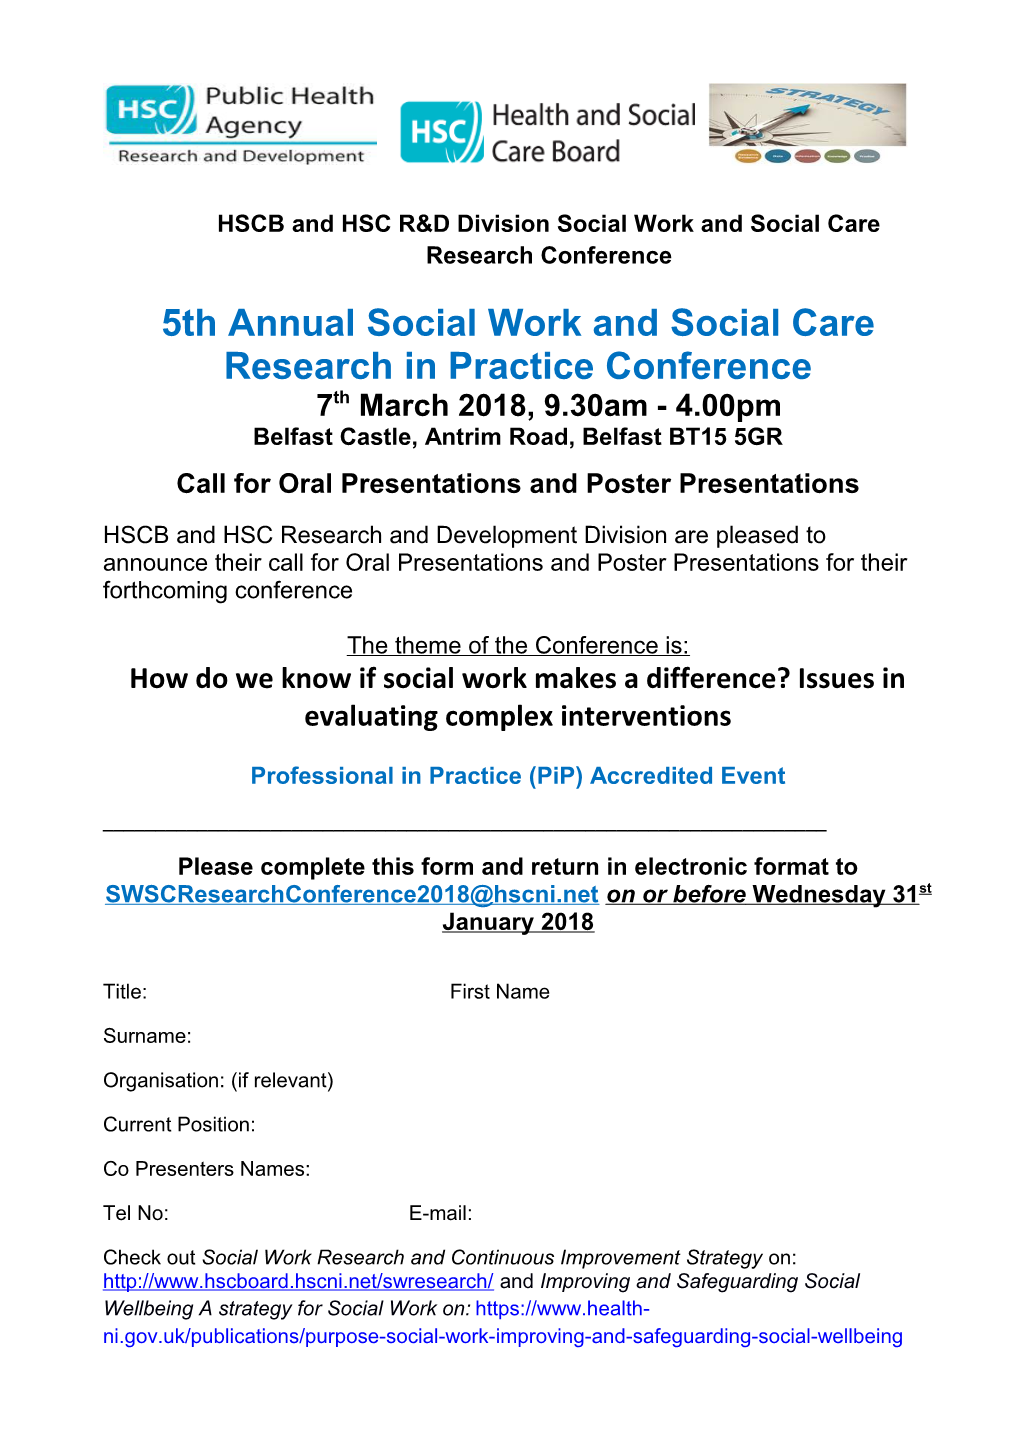 HSCB and HSC R&D Division Social Workand Social Care Research Conference